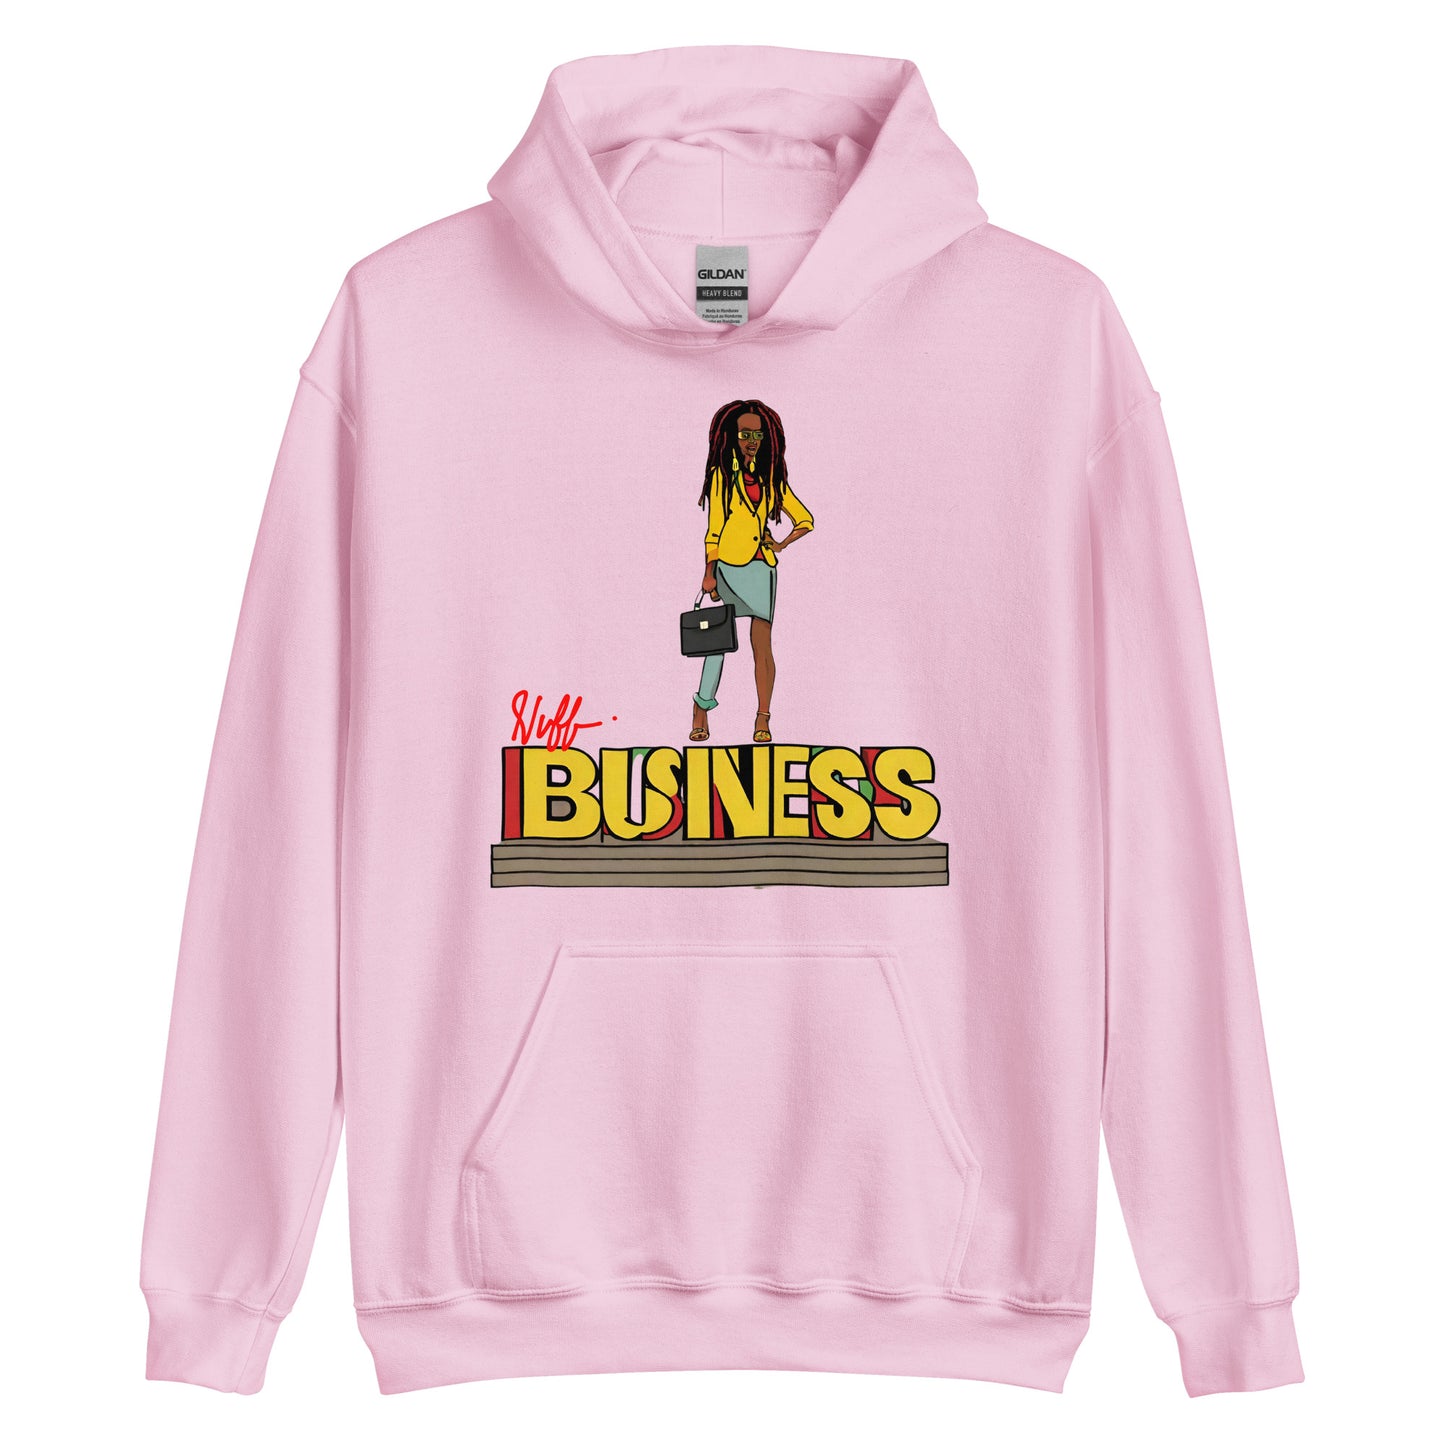 Stand on NUFF Business - Women's Hoodie (RN)